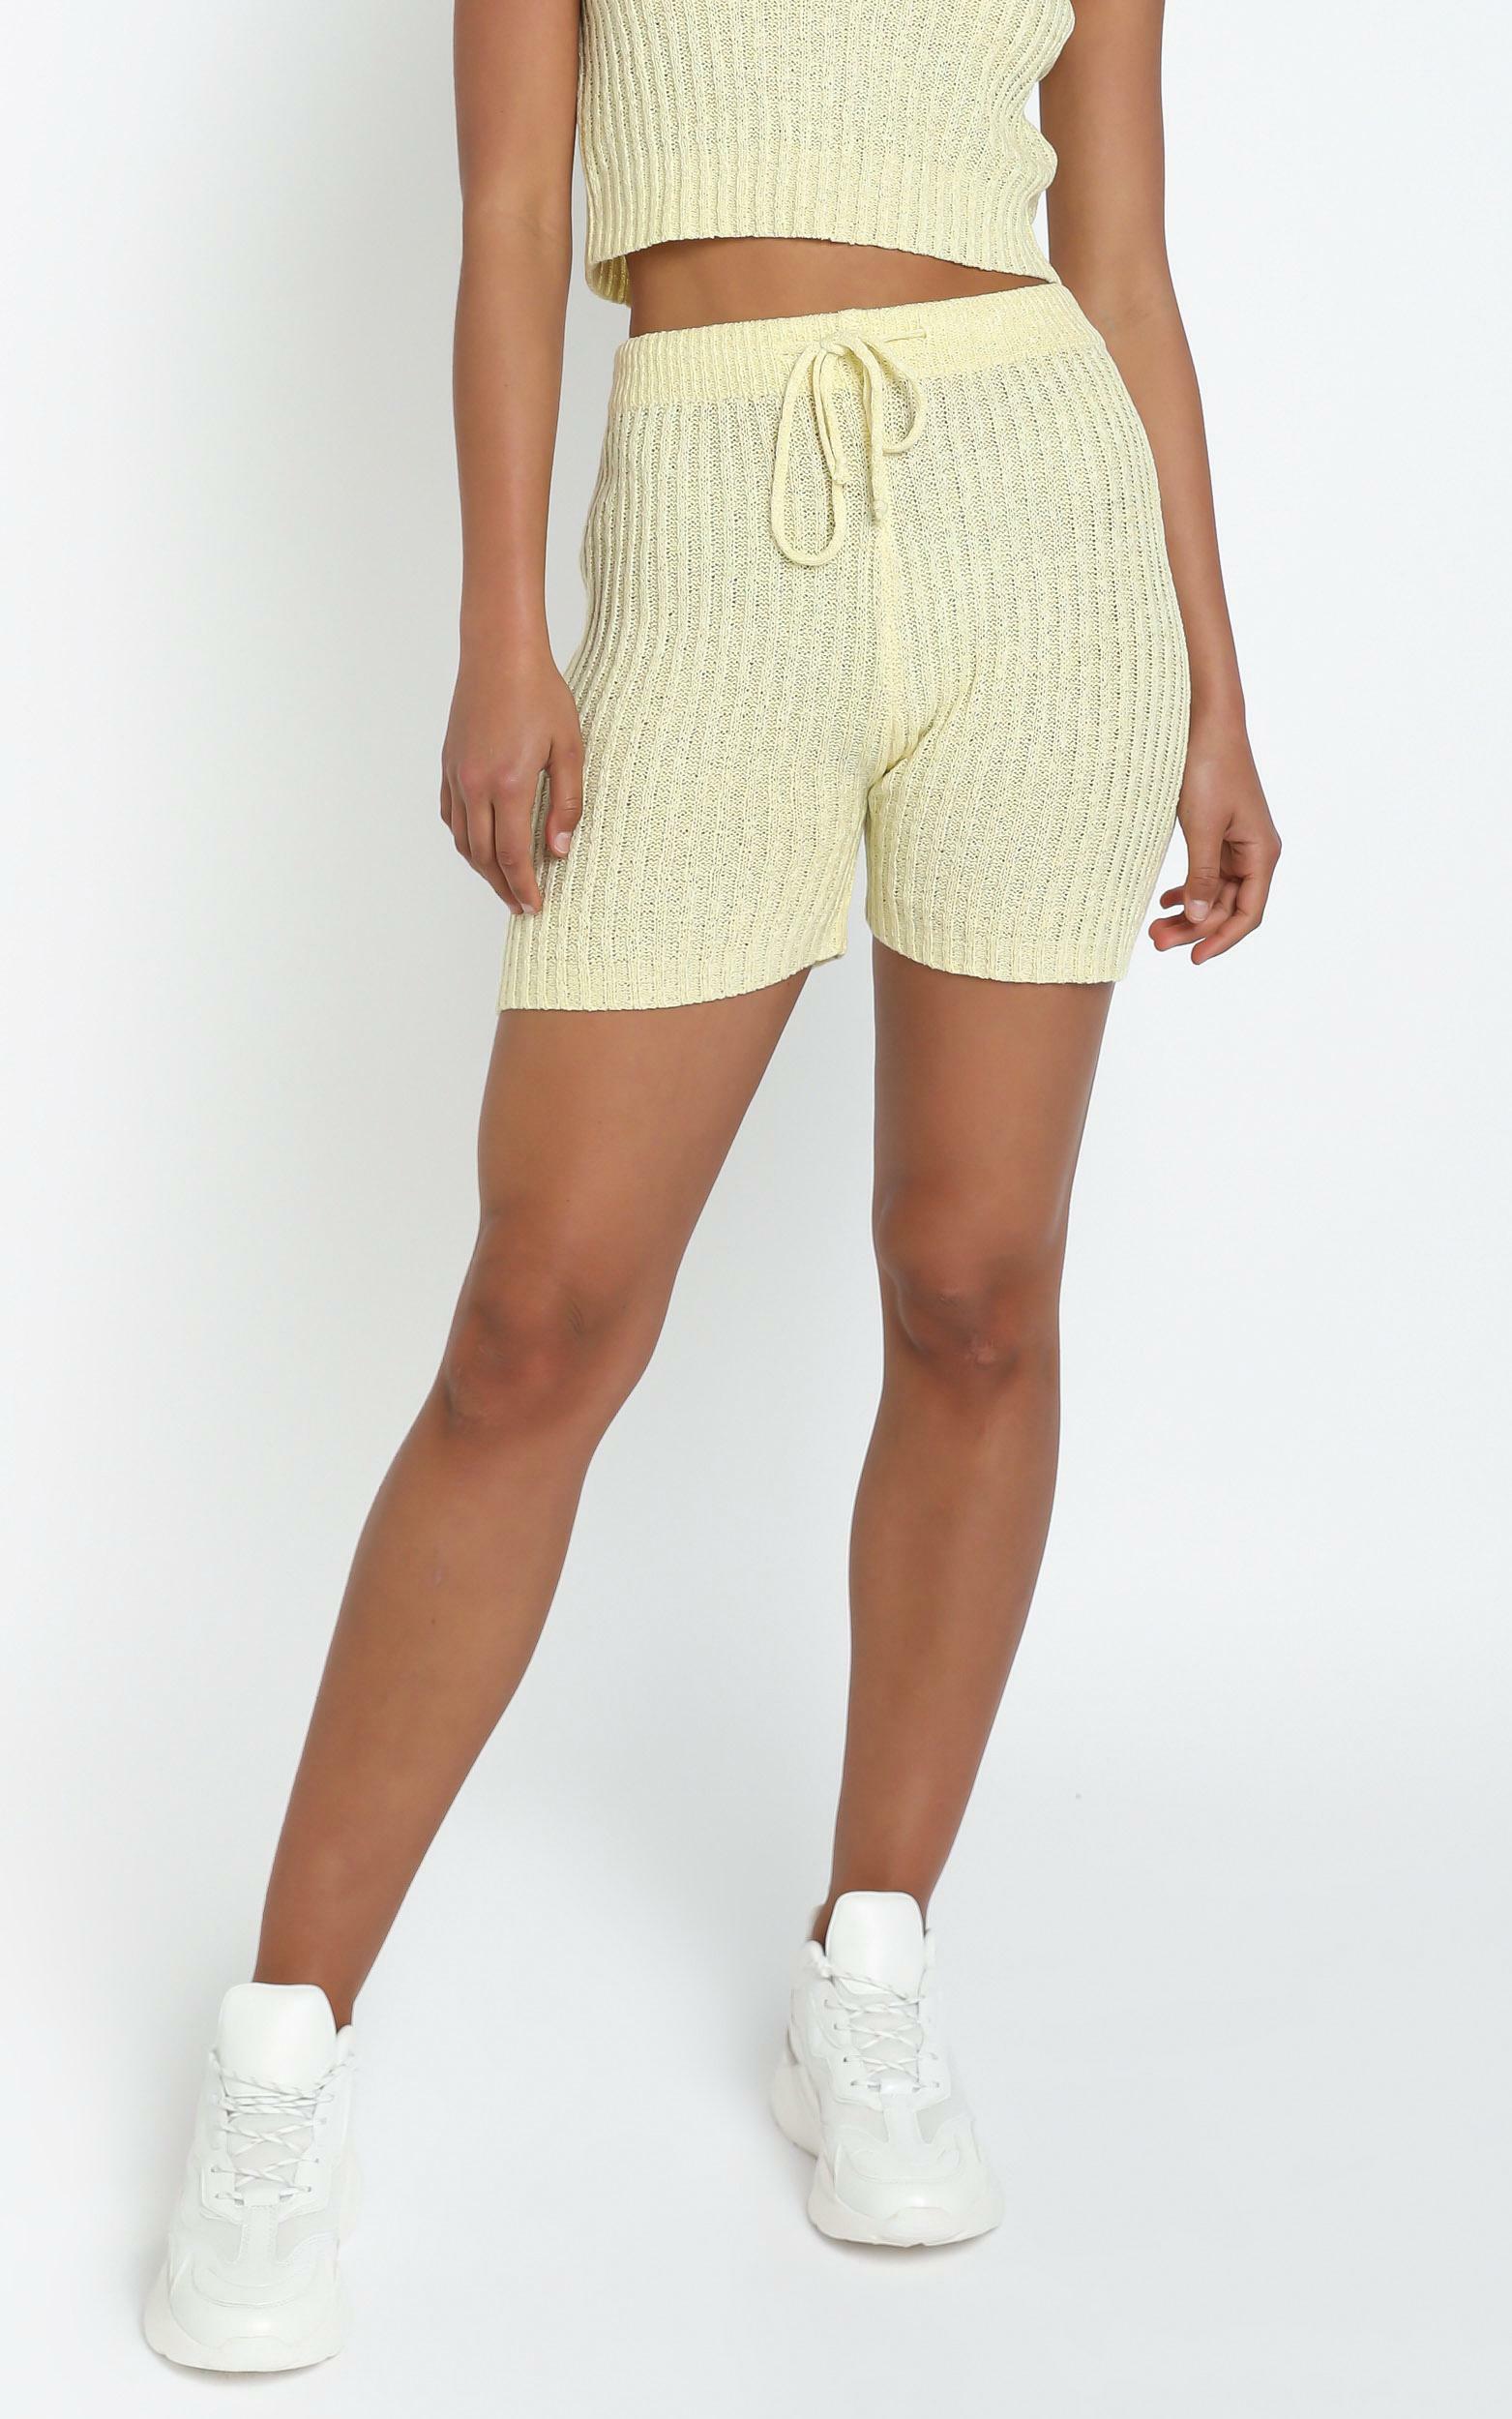 Kerry Knit Shorts in Yellow - L, Yellow, hi-res image number null